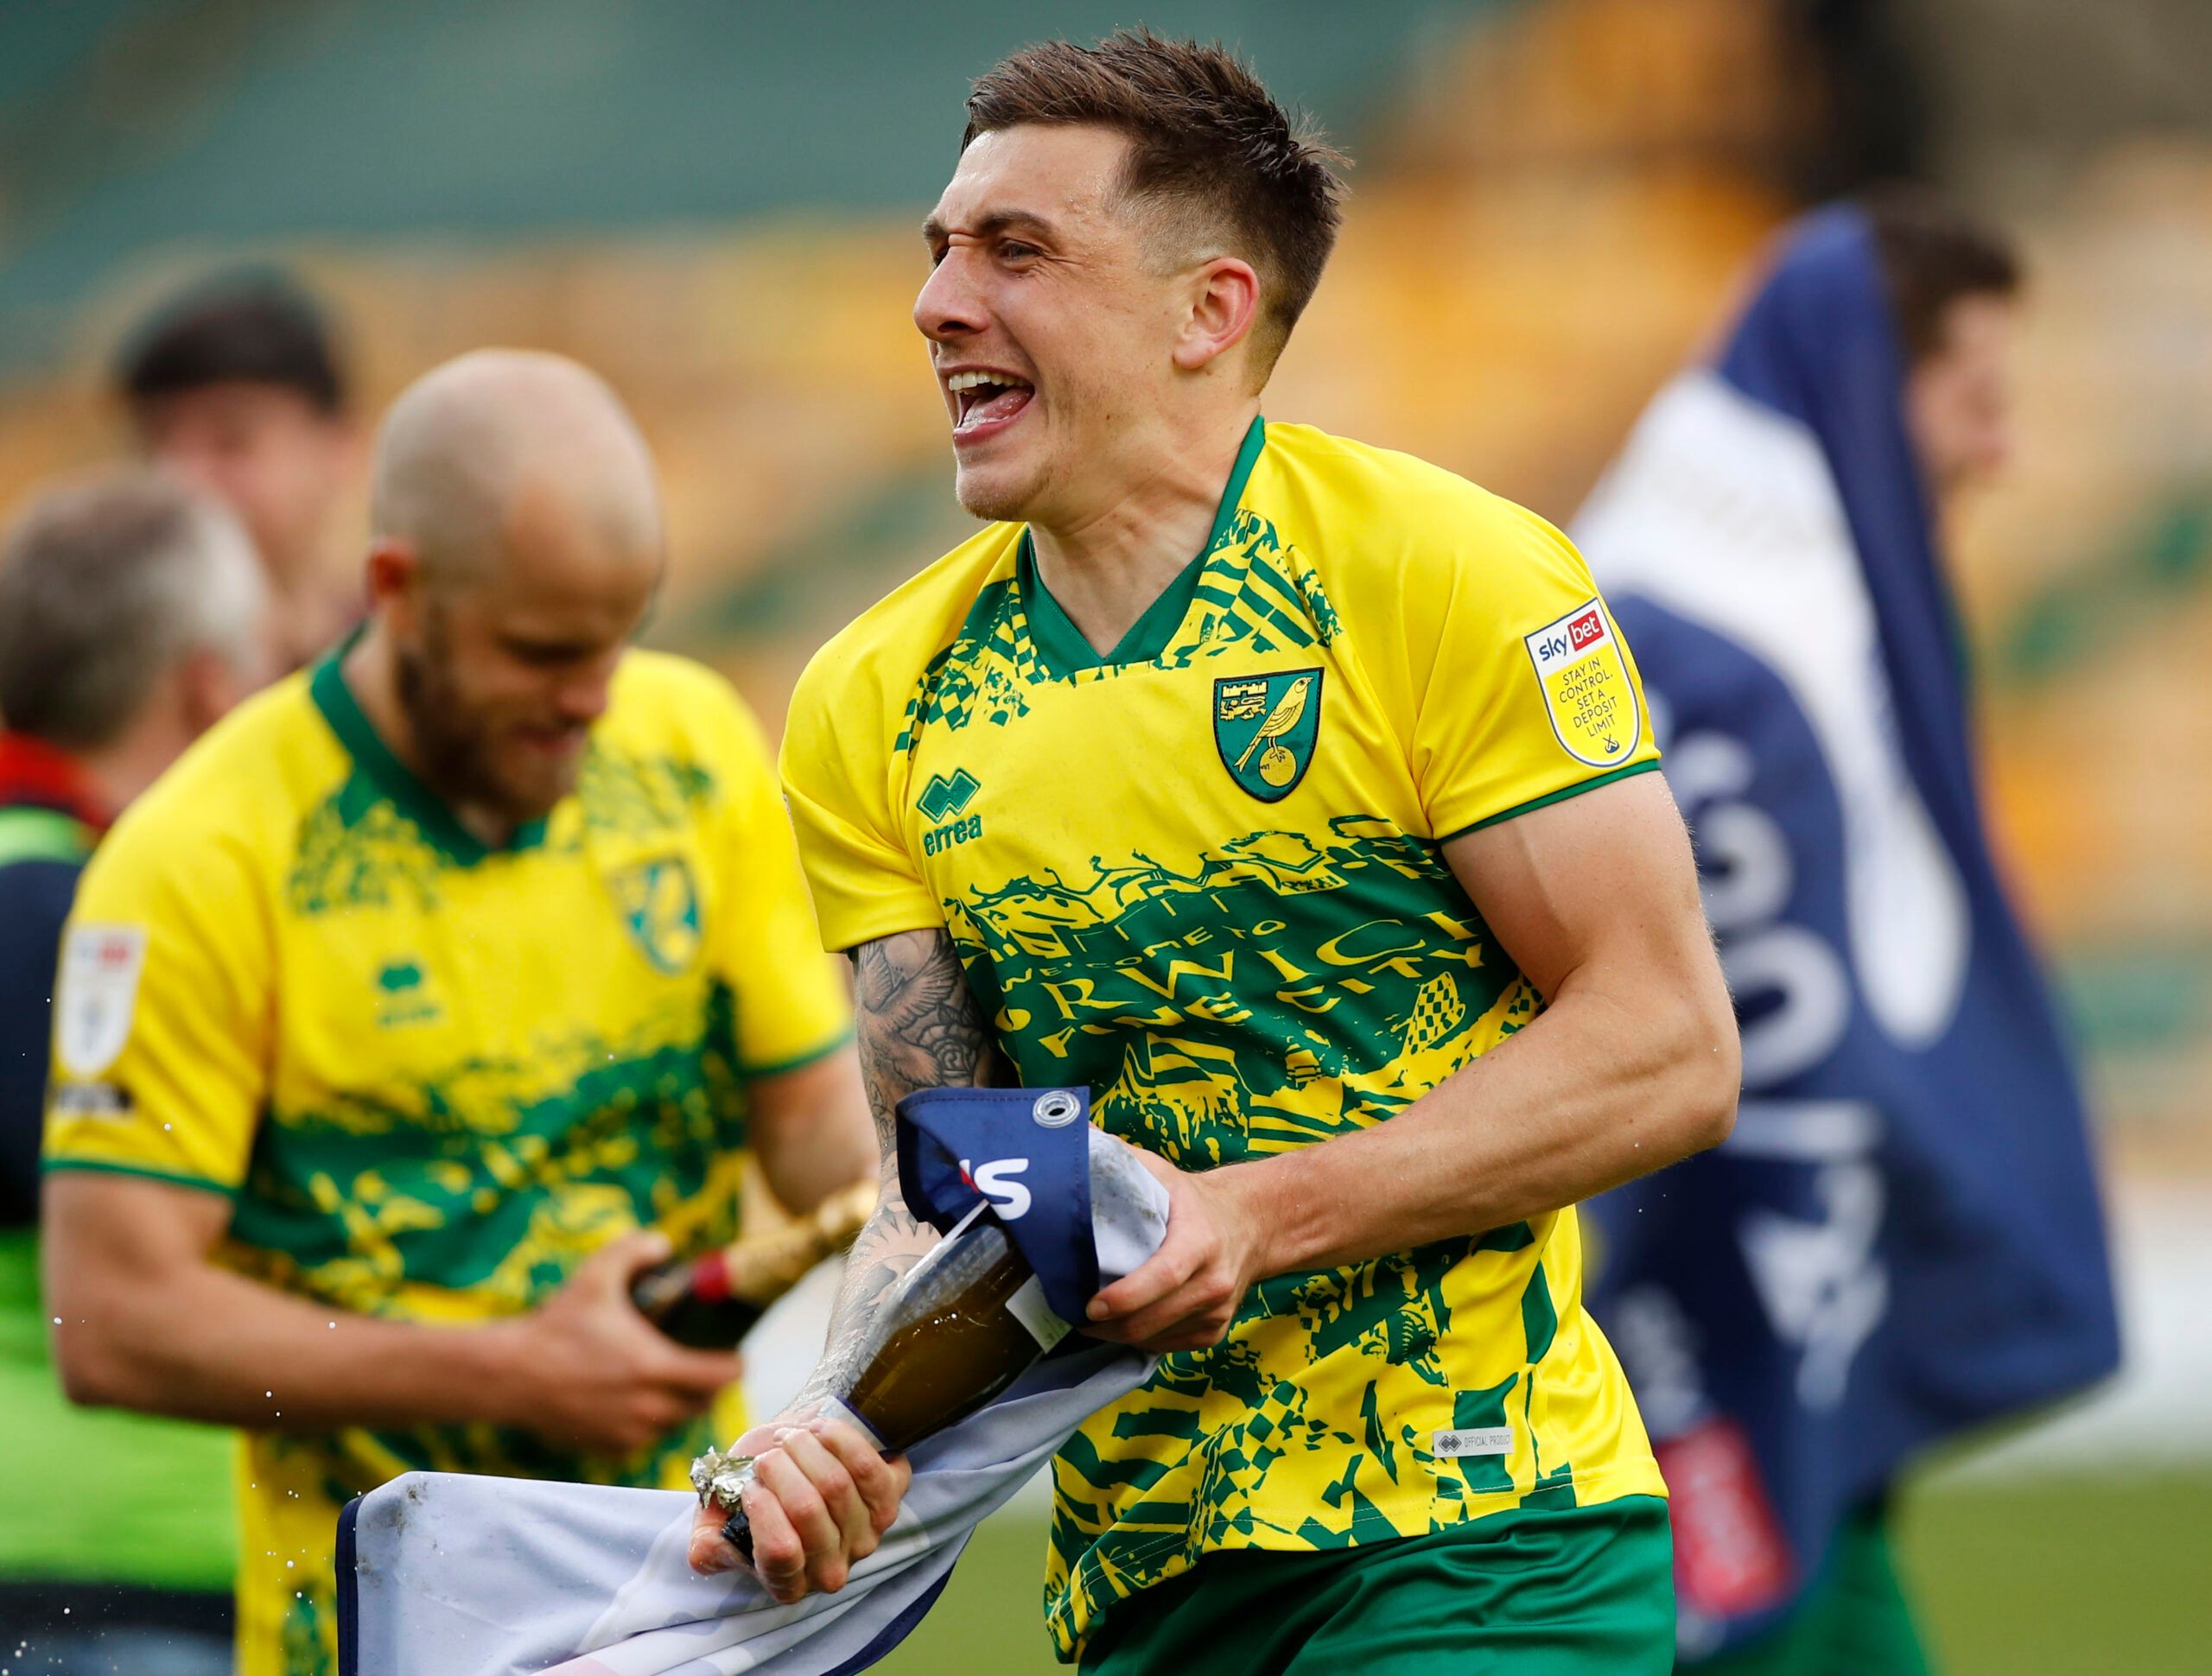 Soccer Football - Championship - Norwich City v Reading - Carrow Road, Norwich, Britain - May 1, 2021 Norwich City's Jordan Hugill celebrates after winning the Championship Action Images via Reuters/Andrew Boyers EDITORIAL USE ONLY. No use with unauthorized audio, video, data, fixture lists, club/league logos or 'live' services. Online in-match use limited to 75 images, no video emulation. No use in betting, games or single club /league/player publications.  Please contact your account represent